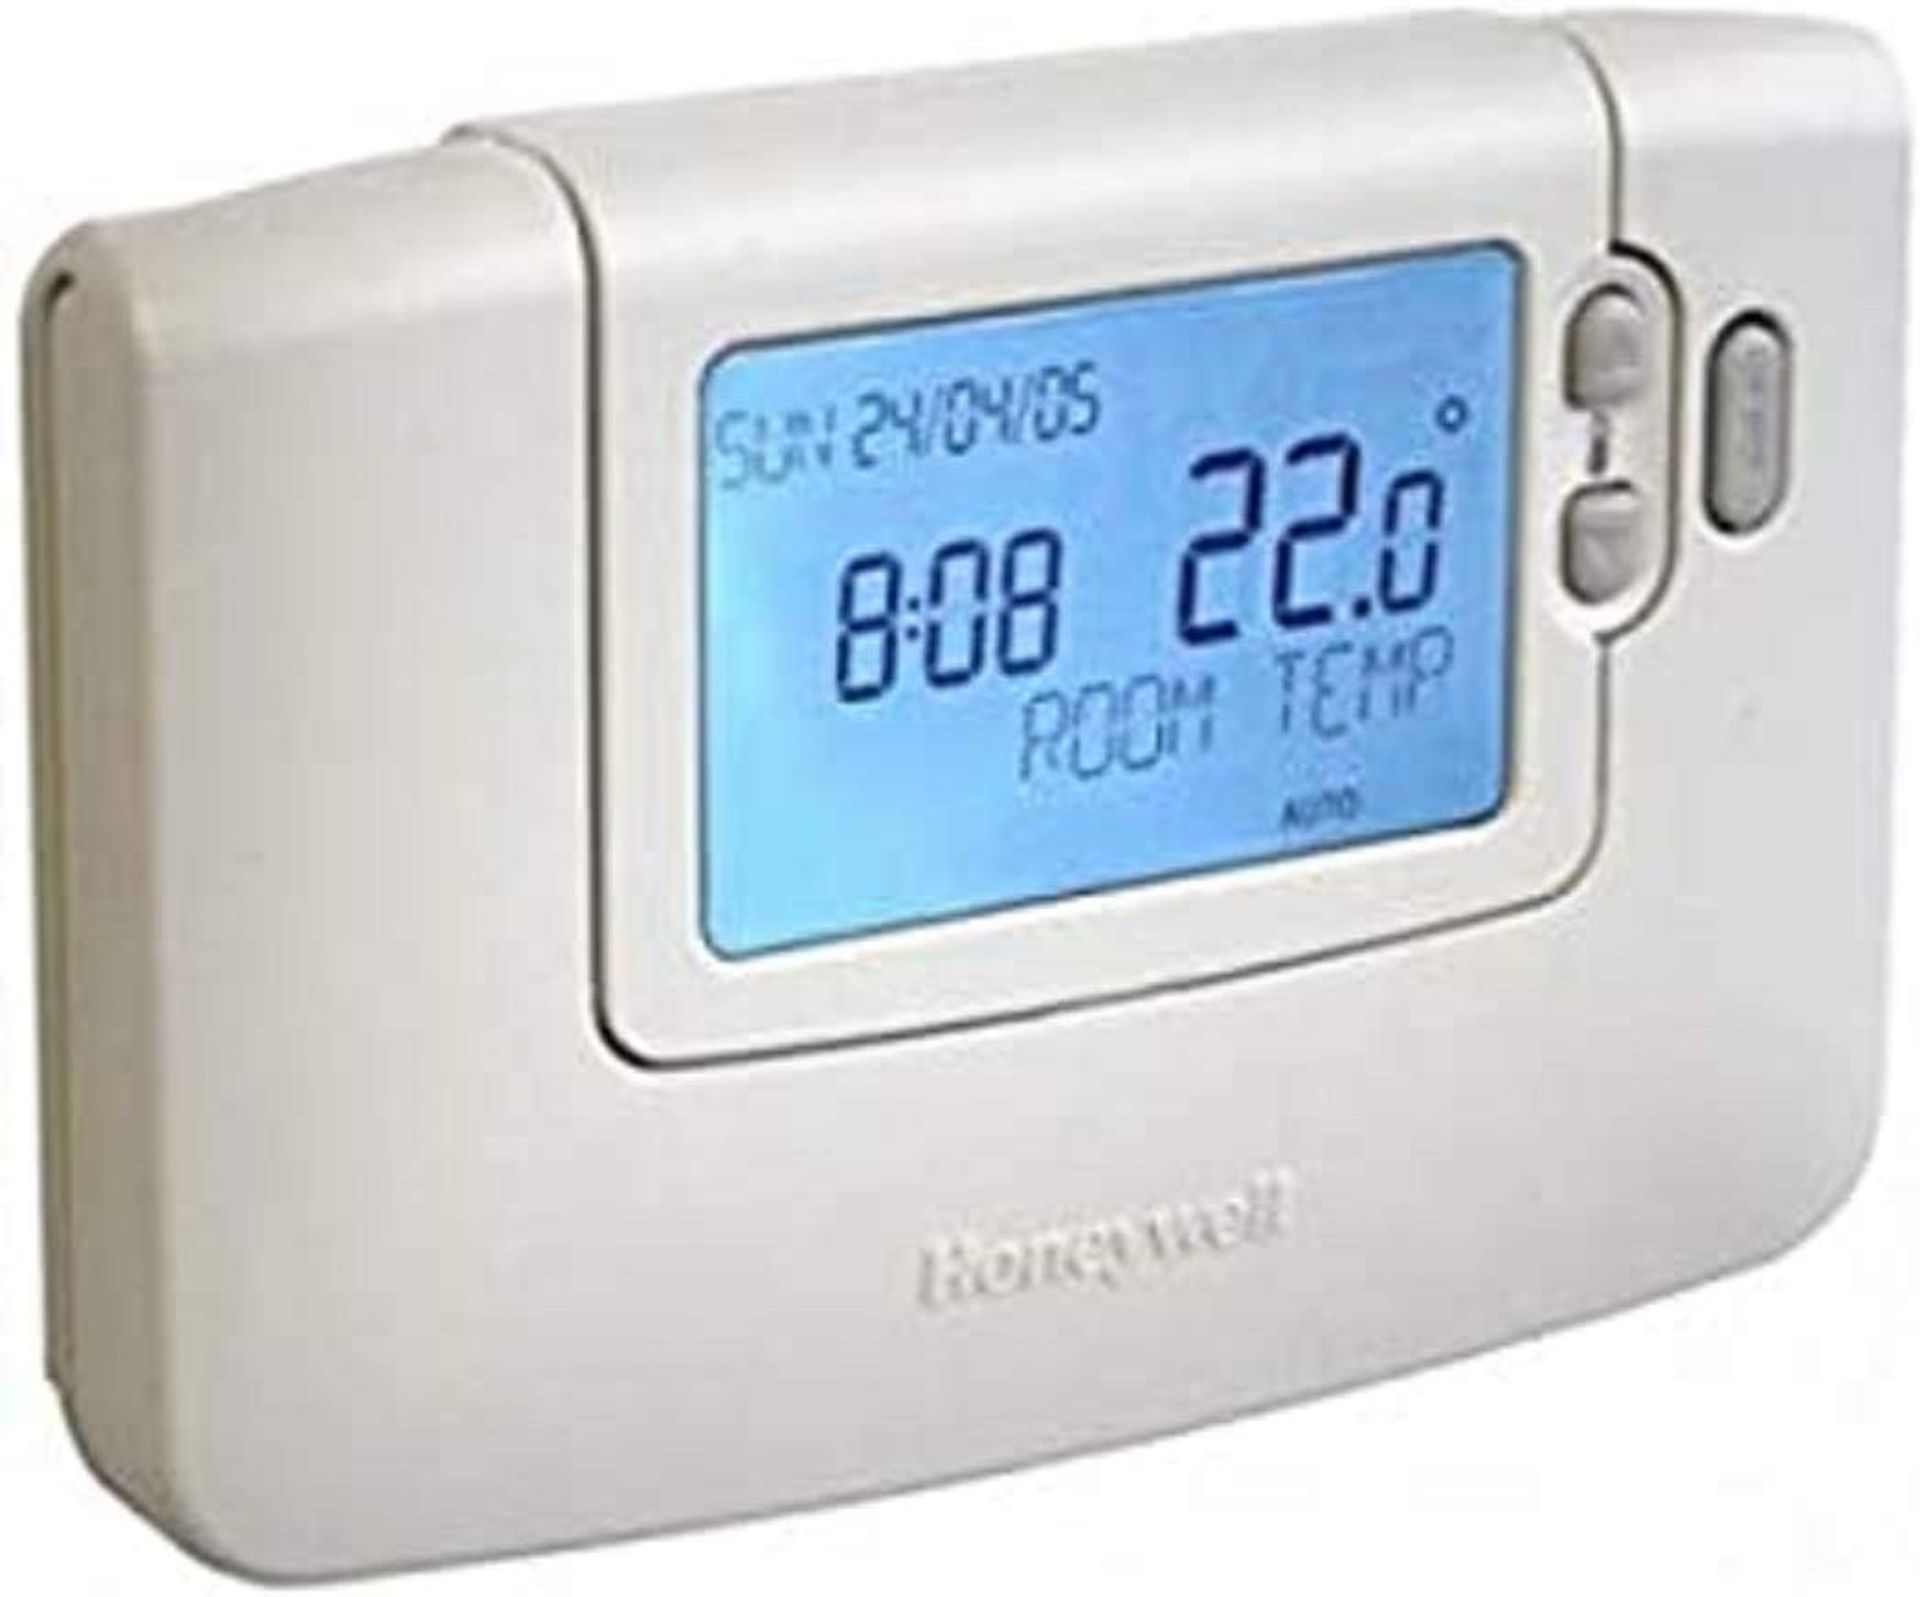 Honeywell 7 Day Programmable Thermostat CM707